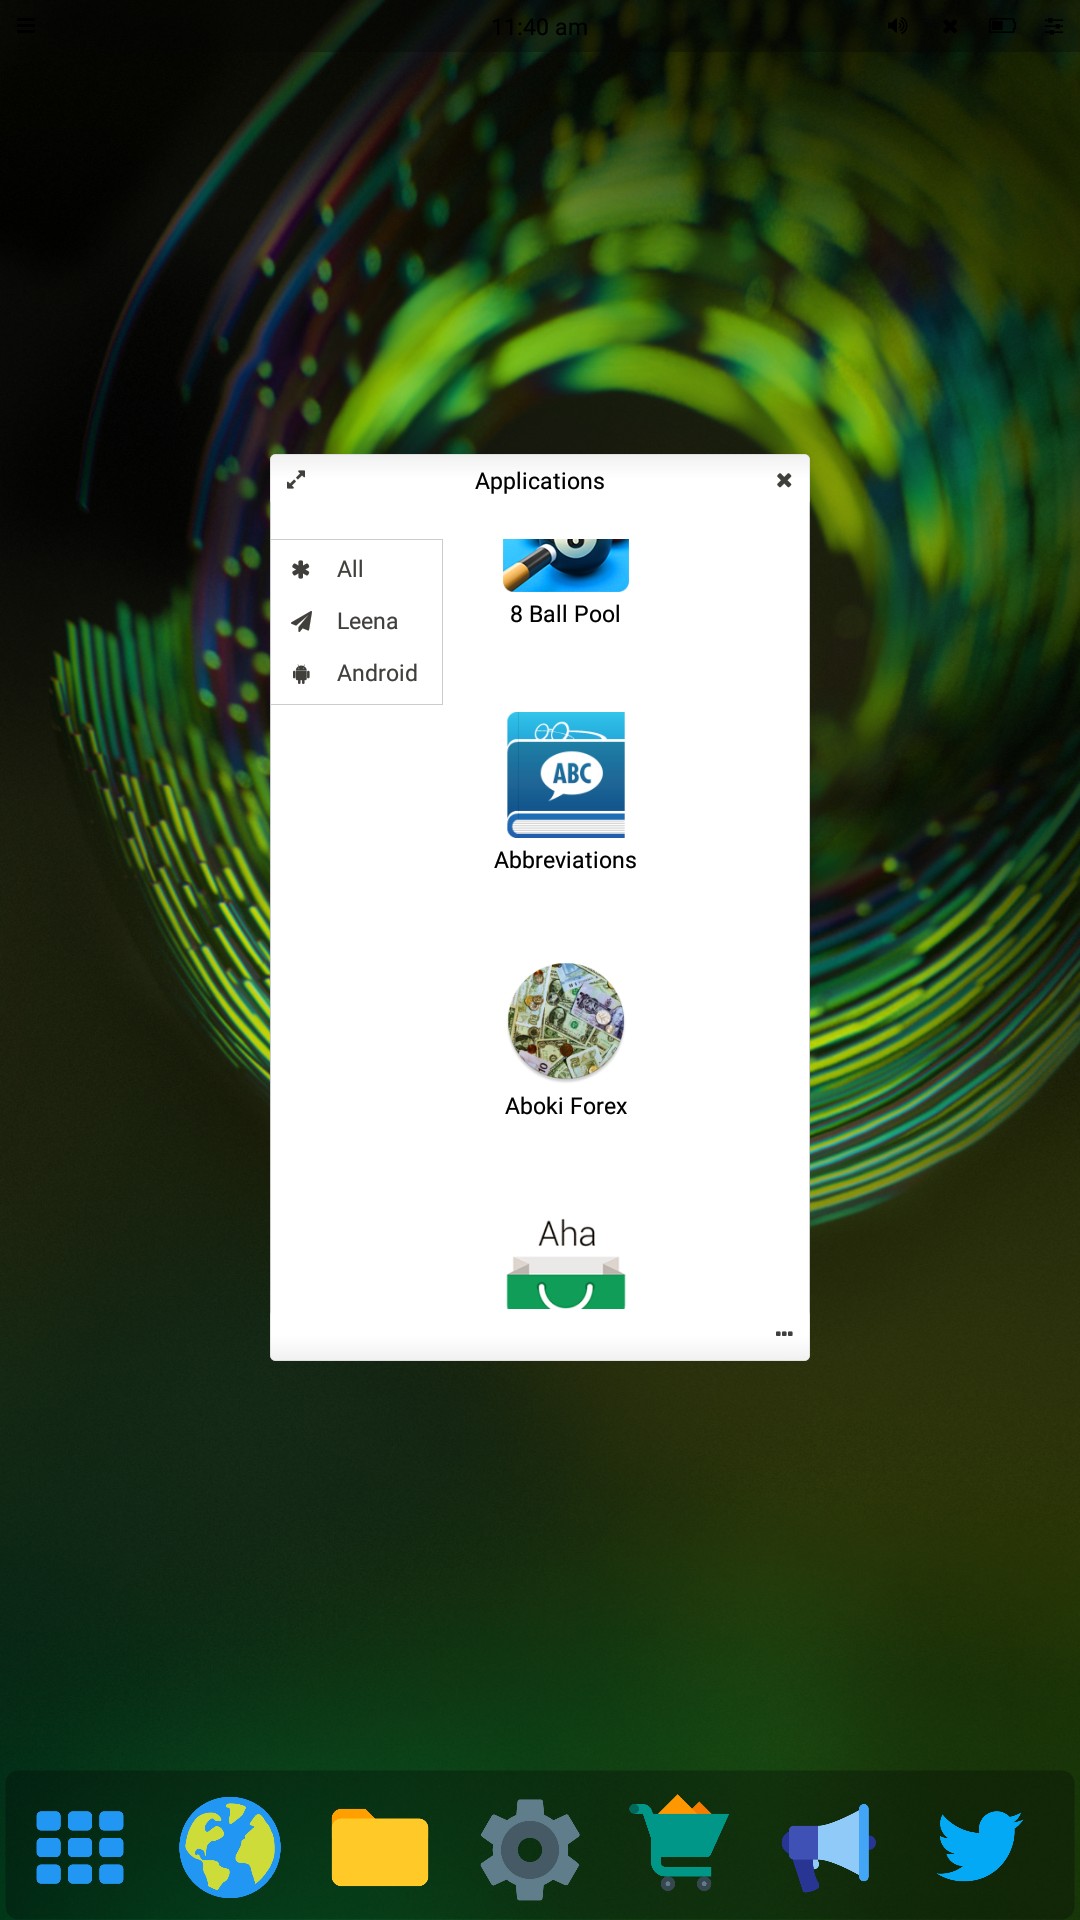 Screenshot 20191004 114041 - How to Turn Your Android Into Mac OS